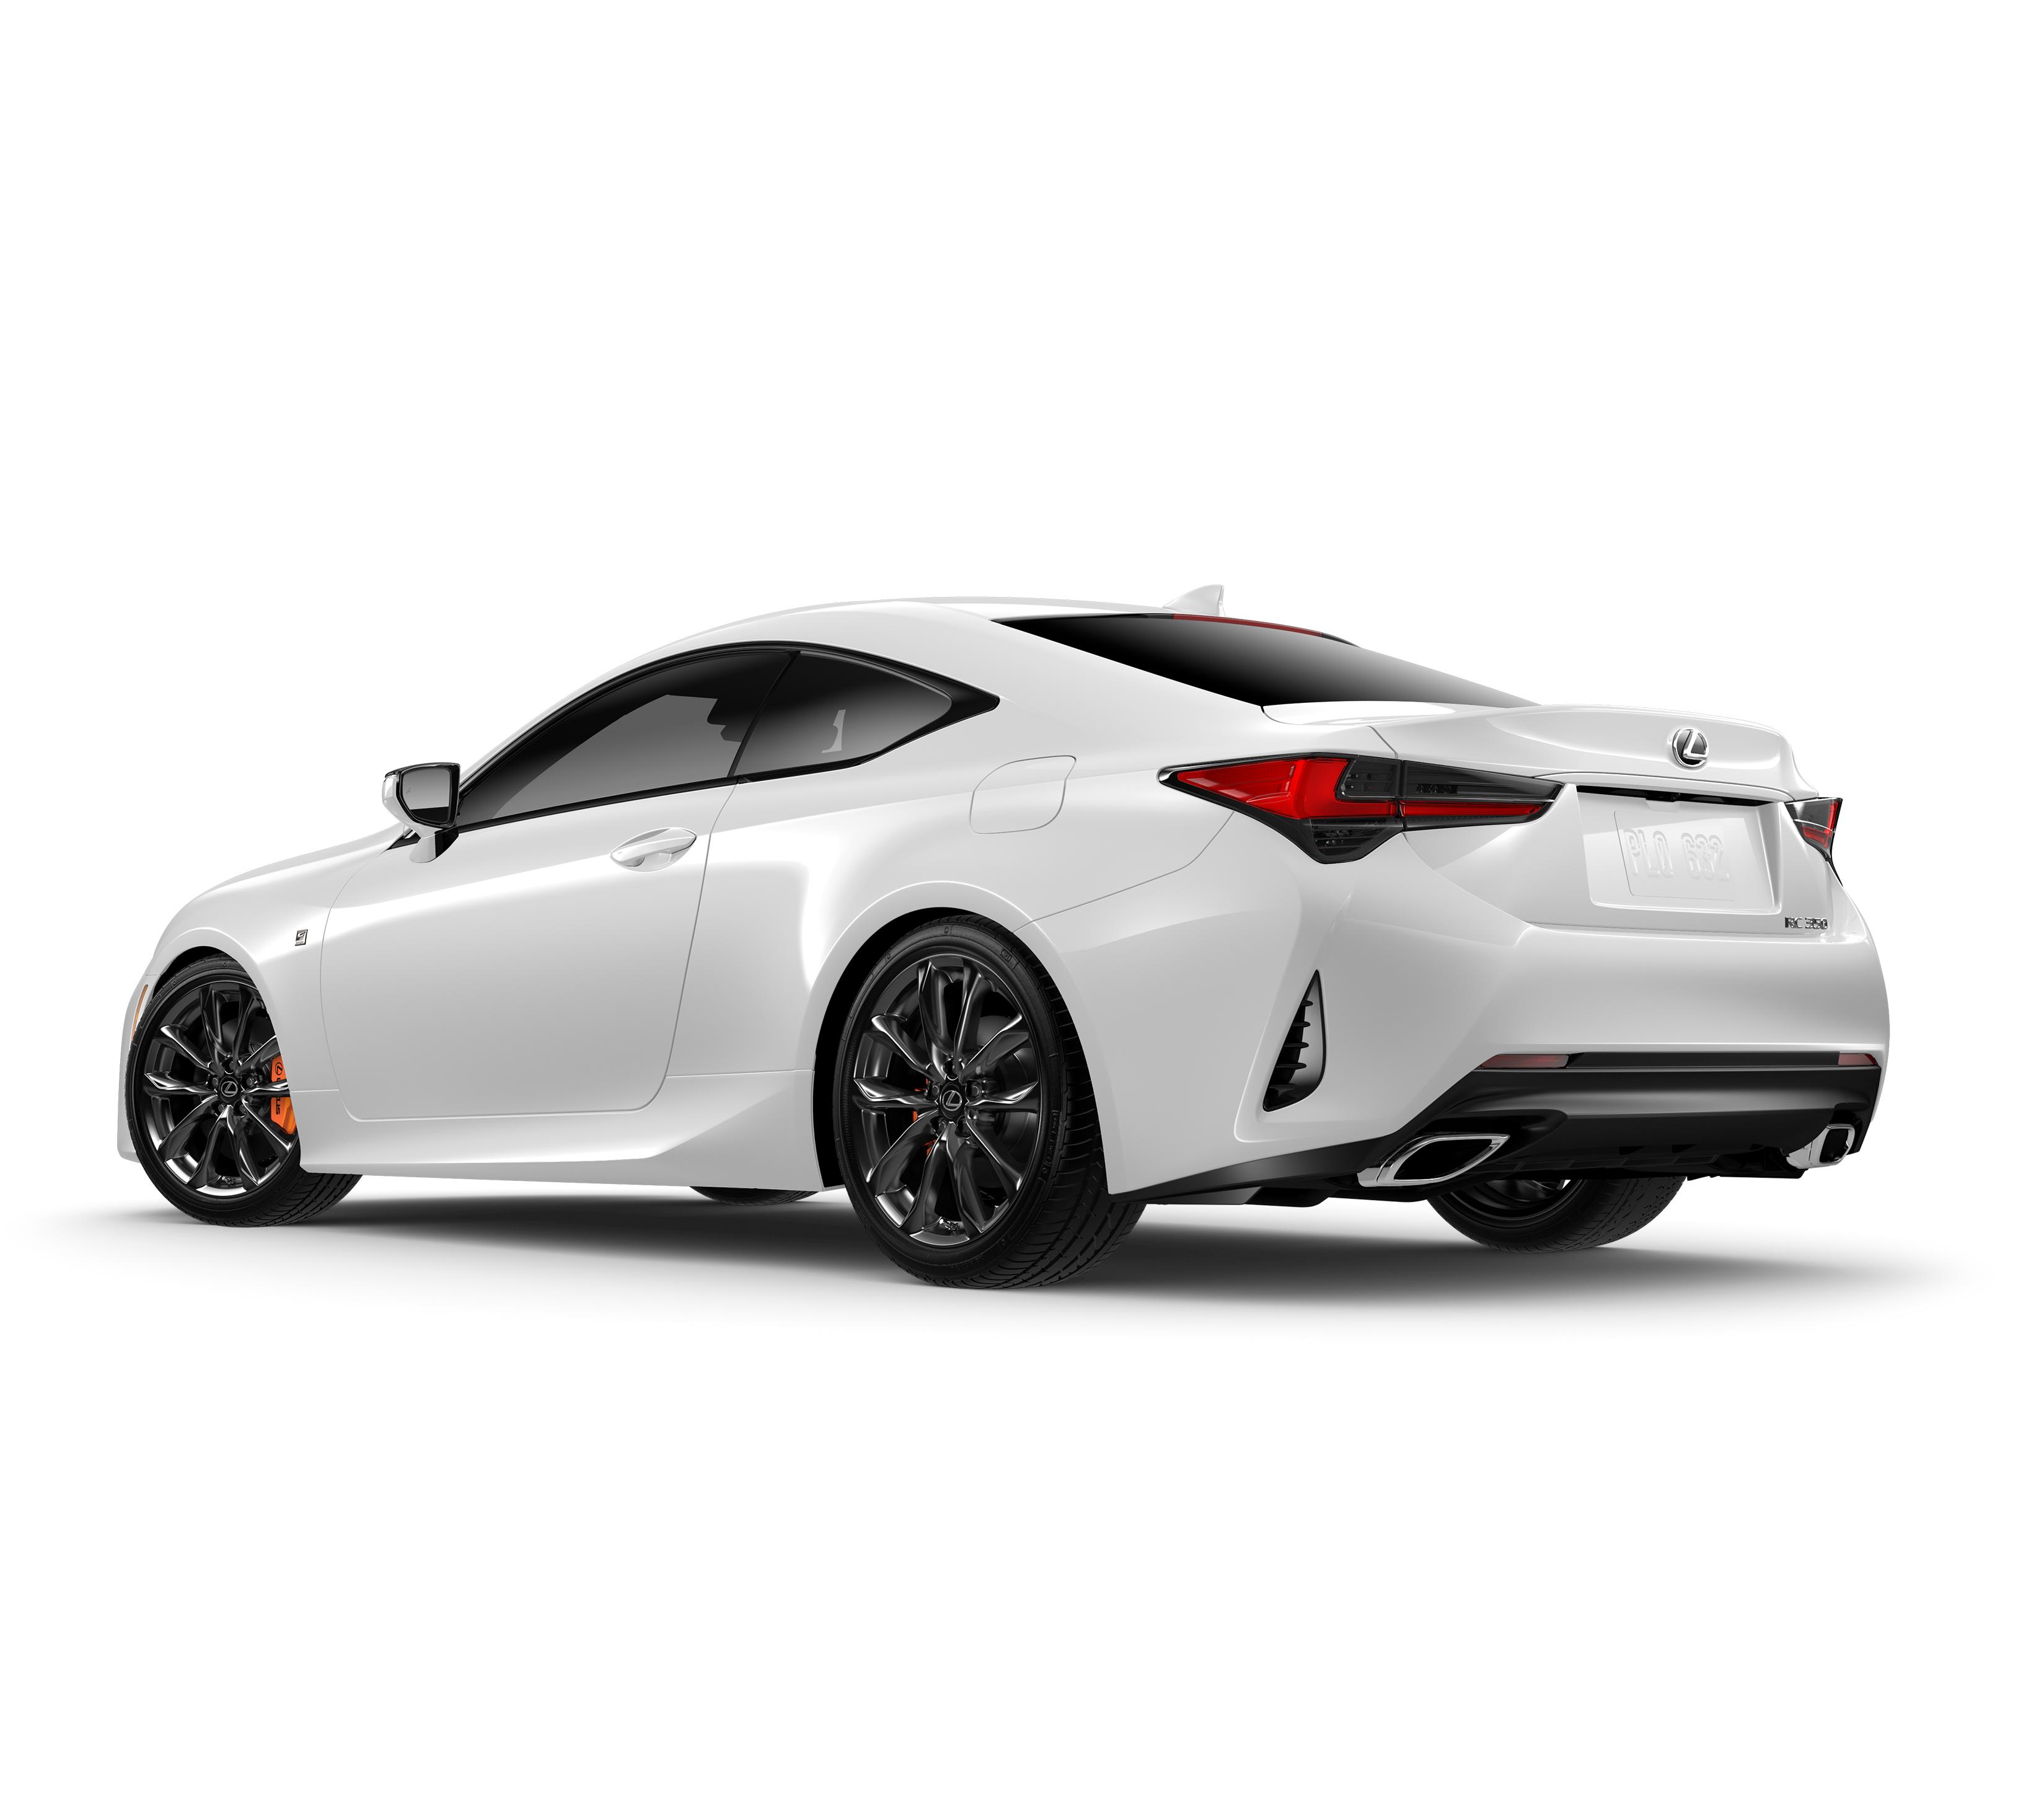 New 2022 Lexus RC 300 F SPORT AWD AWD 2DOOR COUPE in Whippany NL2441